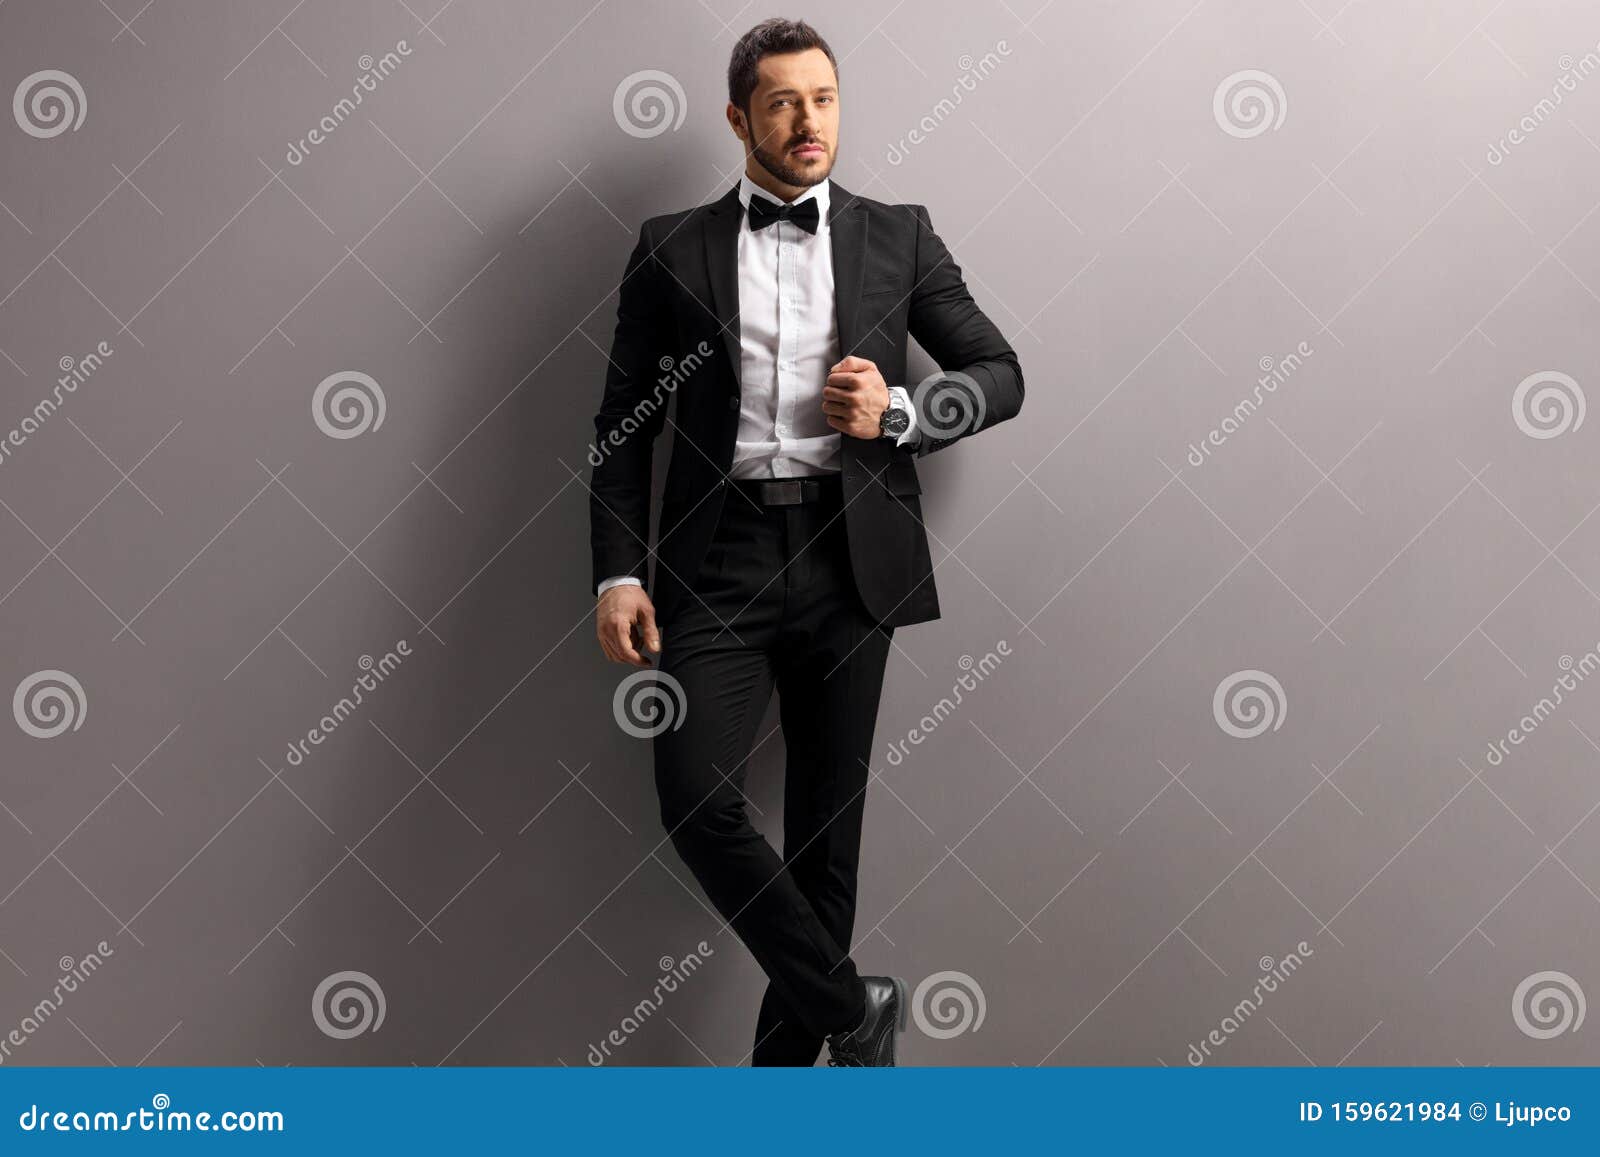 Elegant Young Man in a Black Suit and Bow Tie Stock Photo - Image of ...